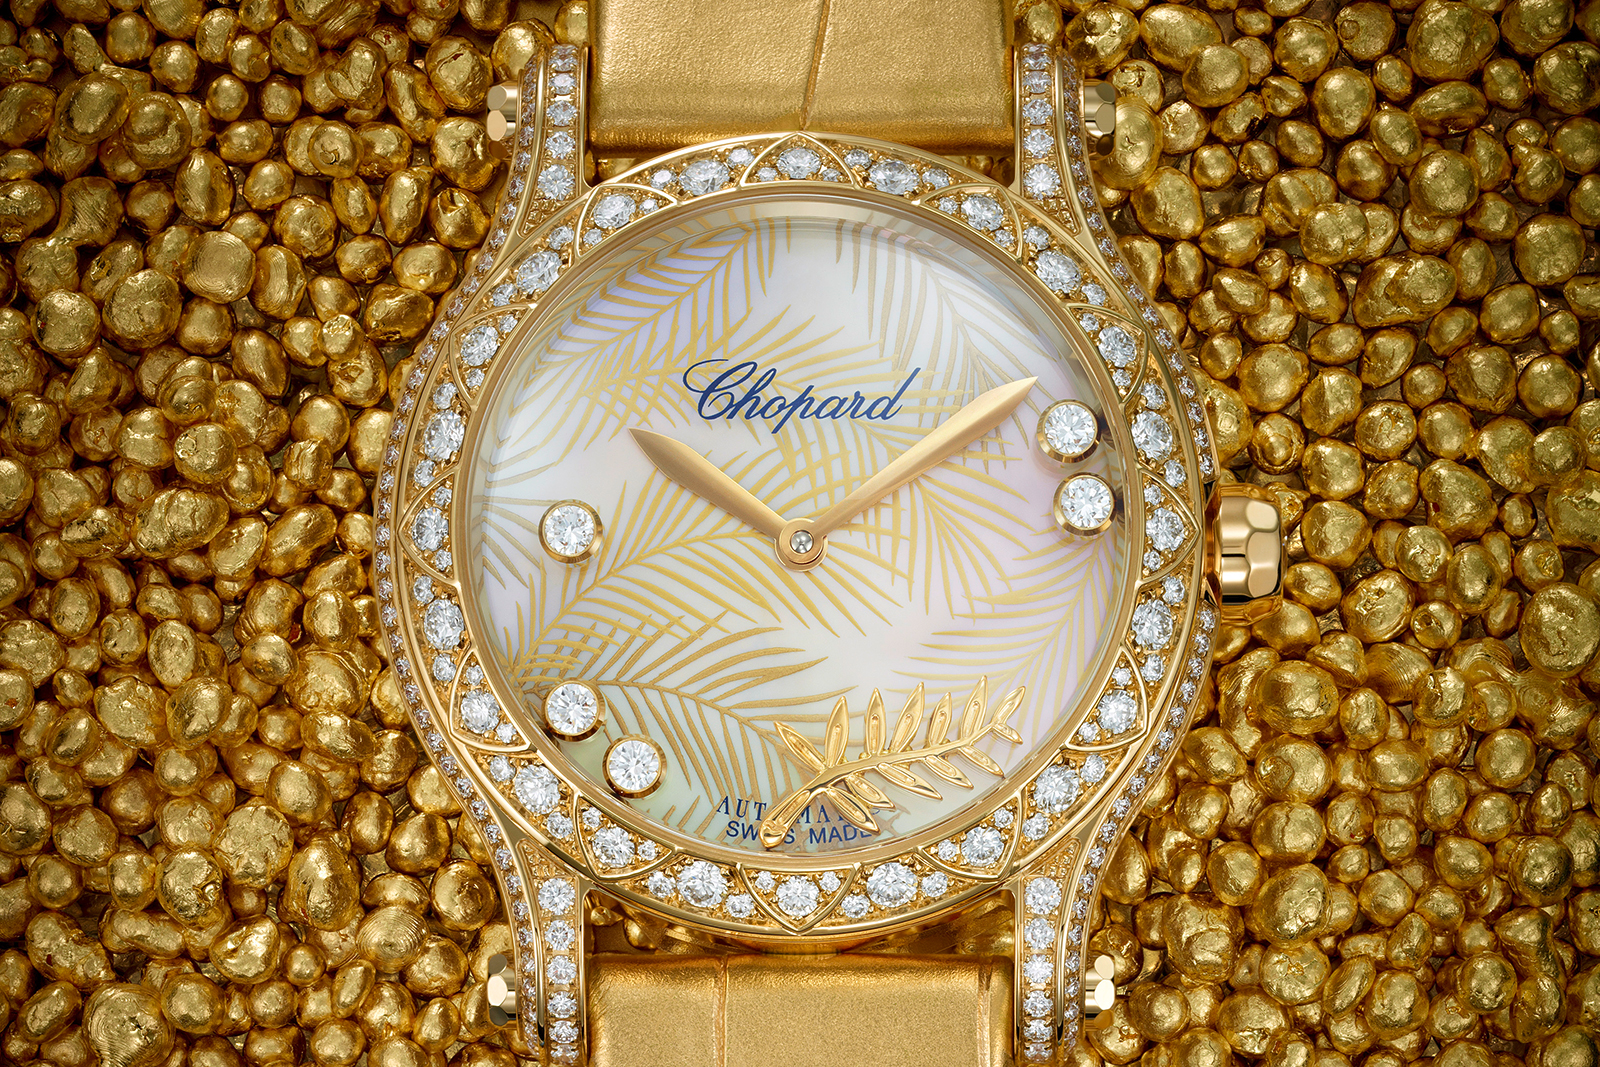 Chopard 'Happy Palm' watch in 100% ethically fair mined 18k gold, mother of pearl dial and brilliant cut diamonds